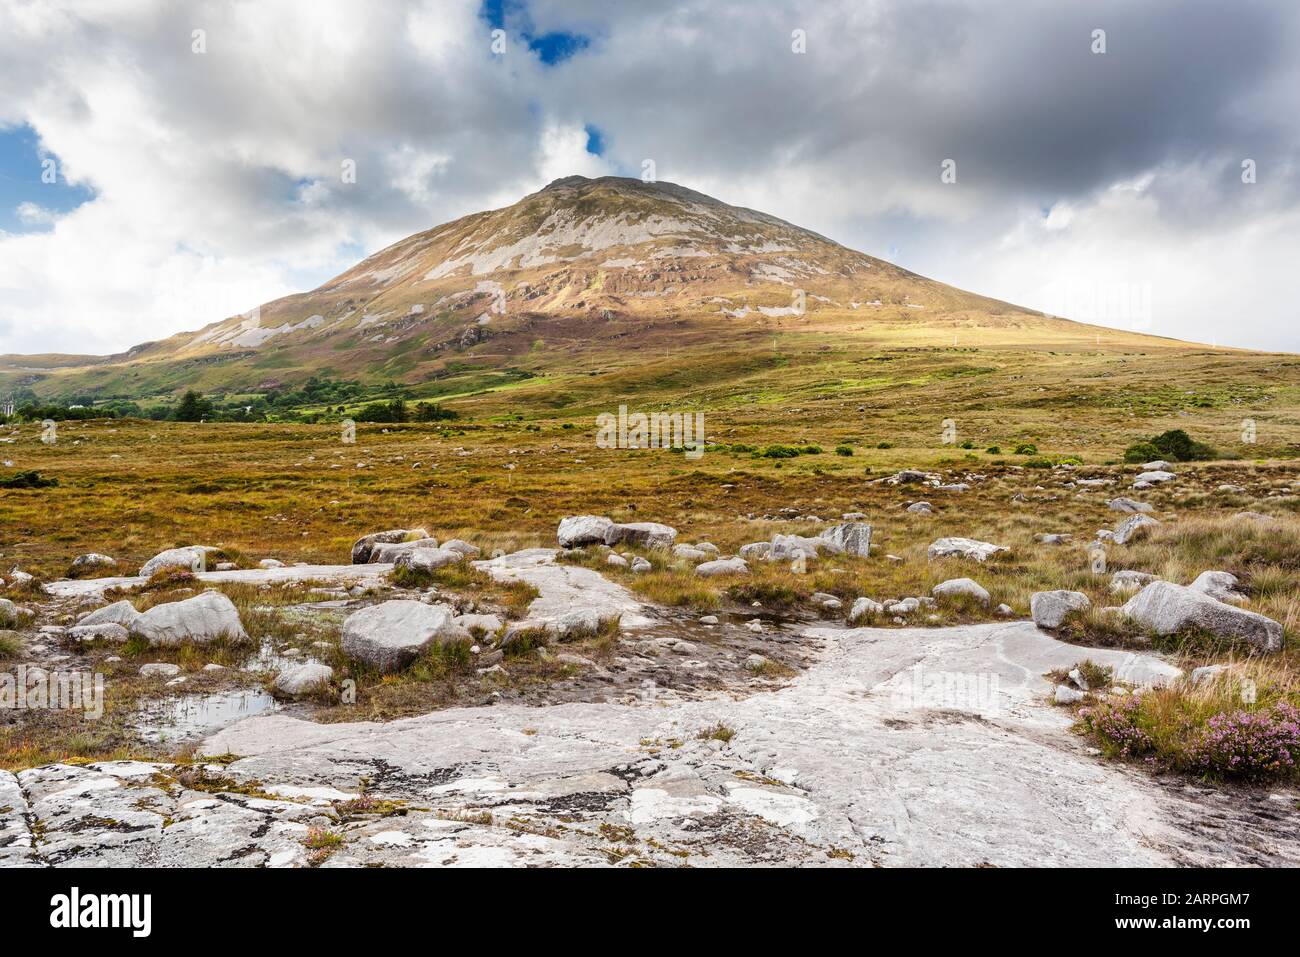 Looking towards Mount Errigal, one of Ireland's most iconic mountains, from outcrop of Main Donegal Granite near Dunlewy, County Donegal, Ireland Stock Photo